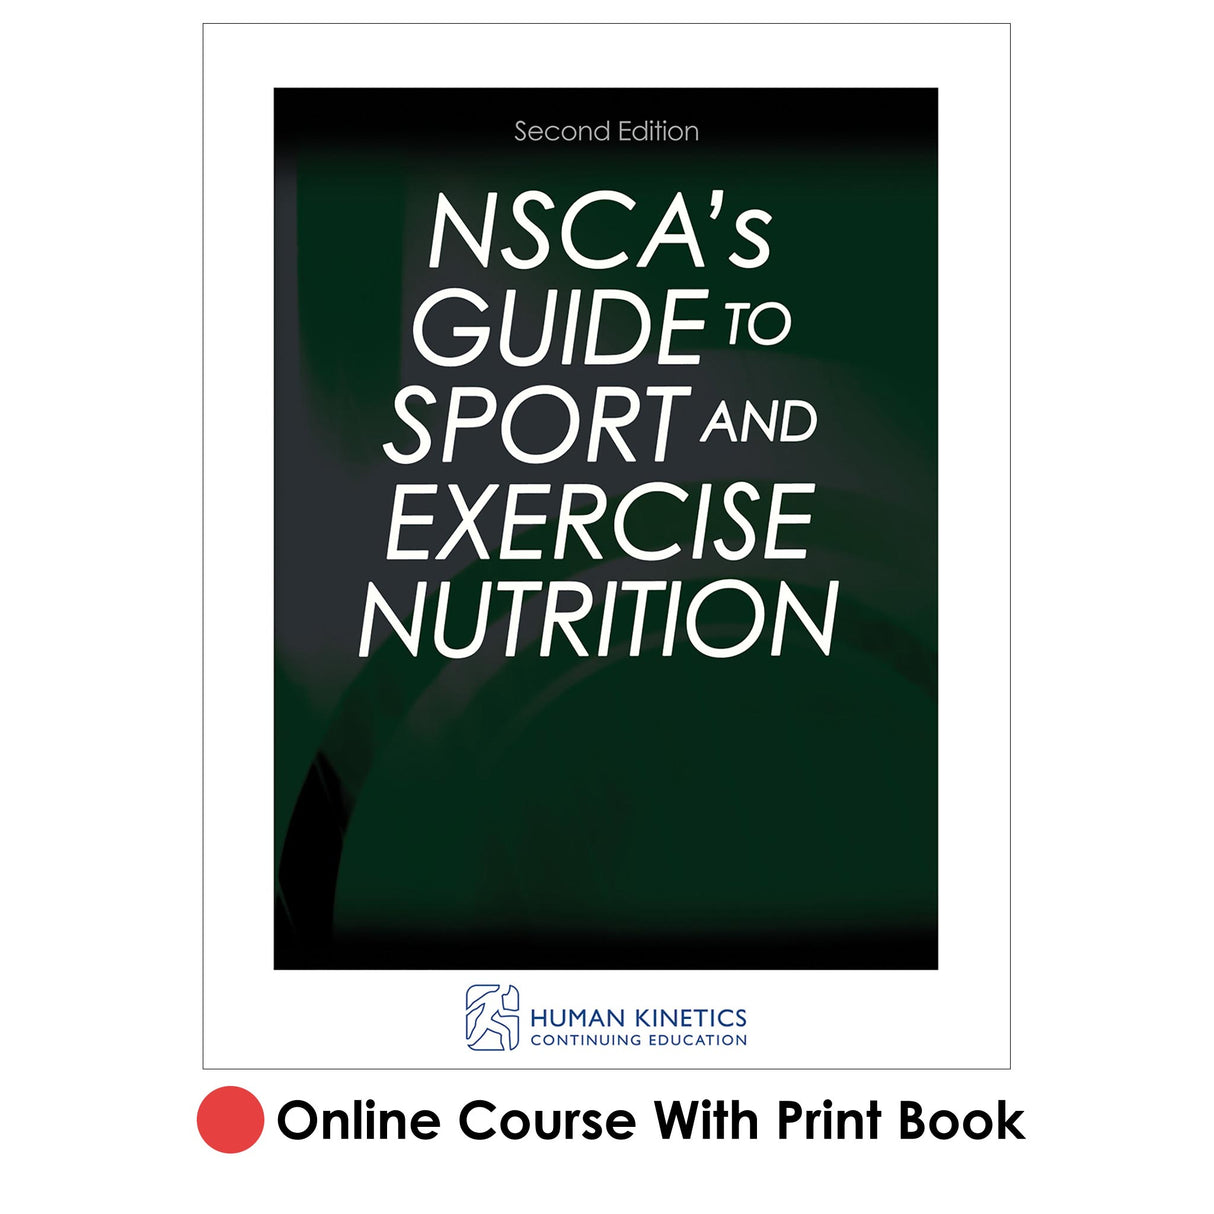 NSCA's Guide to Sport and Exercise Nutrition 2nd Edition Online CE Course With Print Book